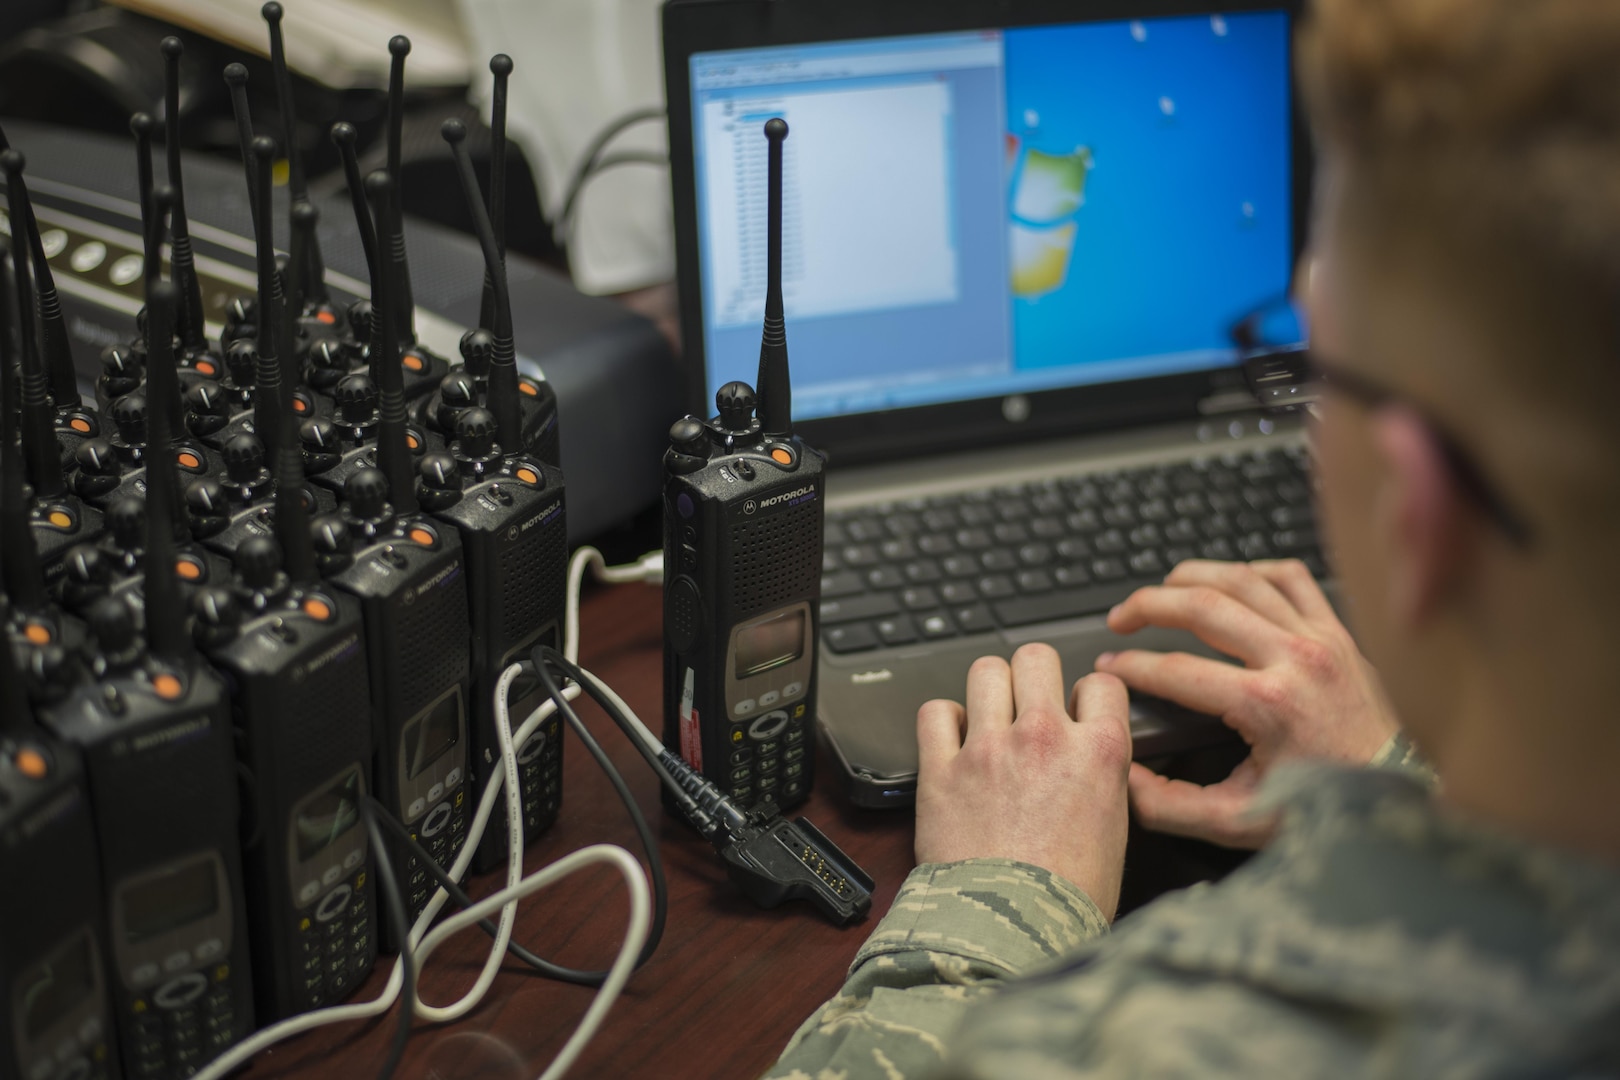 Senior Airman Jason Geiger, 744th Communications Squadron radio frequency transmission system technician, programs a land mobile radio on Joint Base Andrews, Md., Jan. 11, 2017. The 744th CS distributed approximately 200 LMRs to Airmen participating in the 58th Presidential Inauguration. Keeping Airmen connected is one of the 744th CS’s primary mission during the inauguration. (U.S. Air Force photo by Airman 1st Class Valentina Lopez)